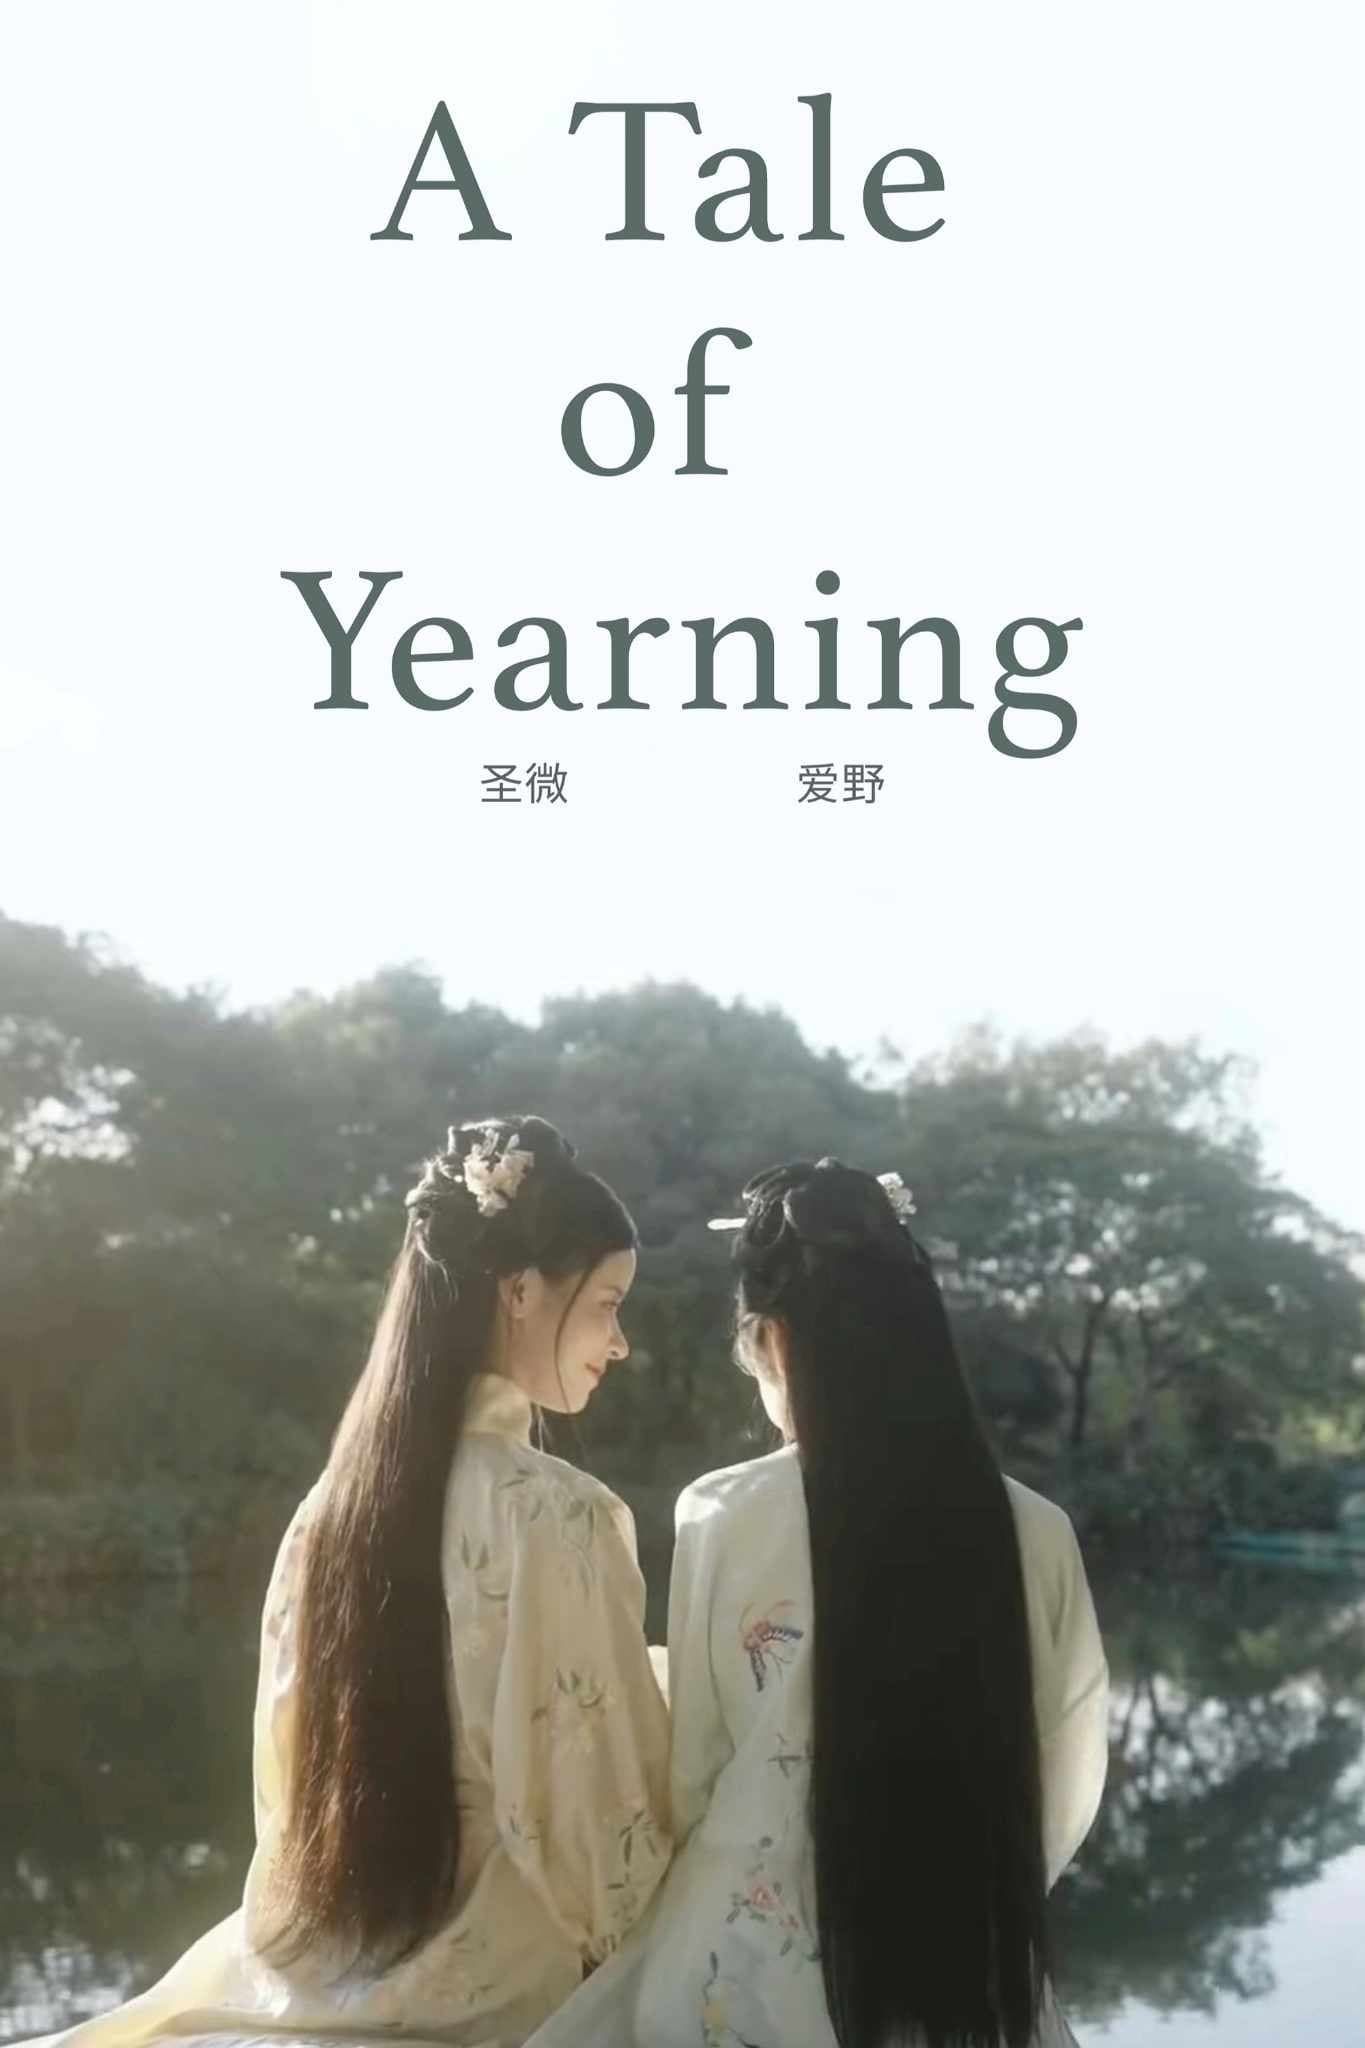 A Tale of Yearning